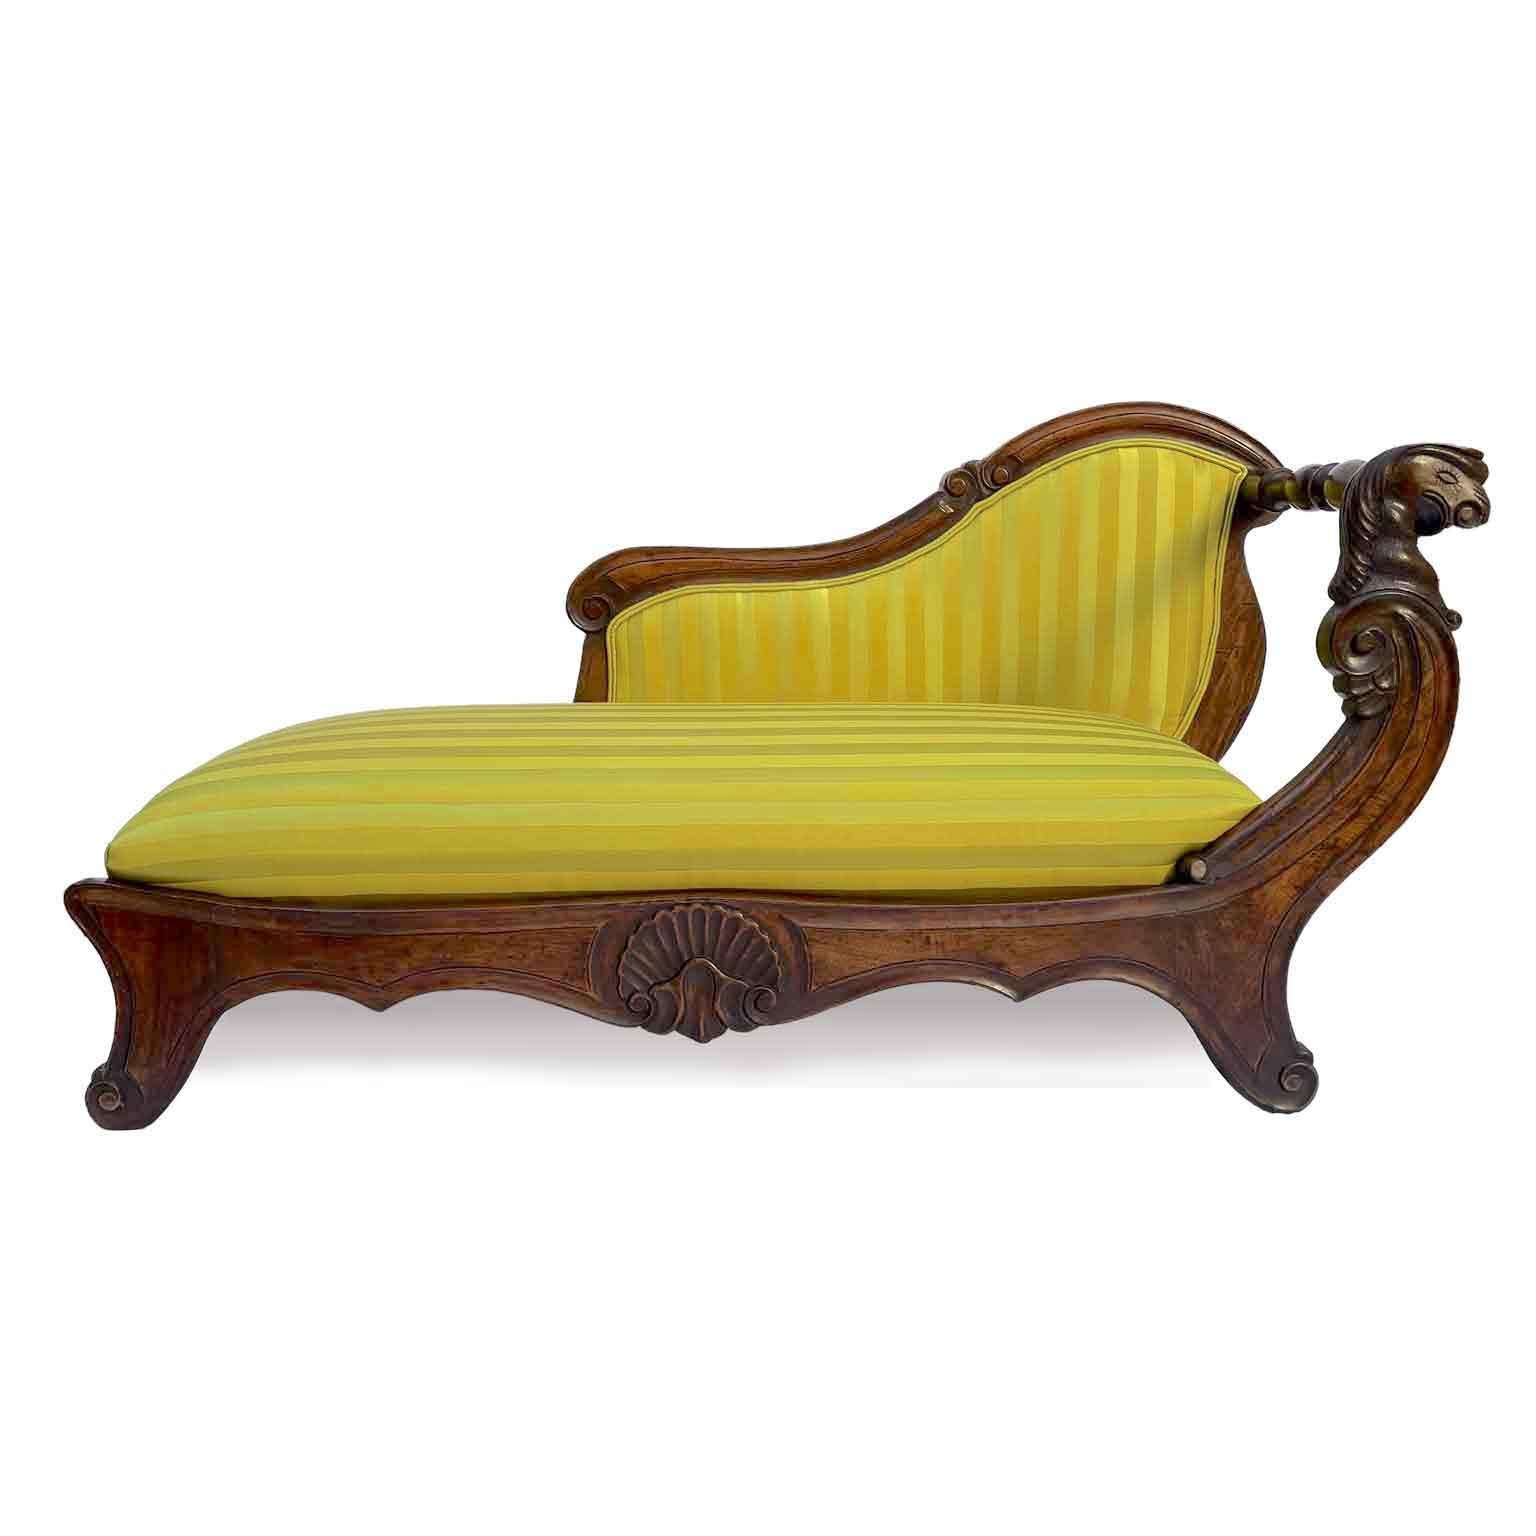 Italian Center Dormeuse in Carved Walnut circa 1850 Yellow Fabric For Sale 2